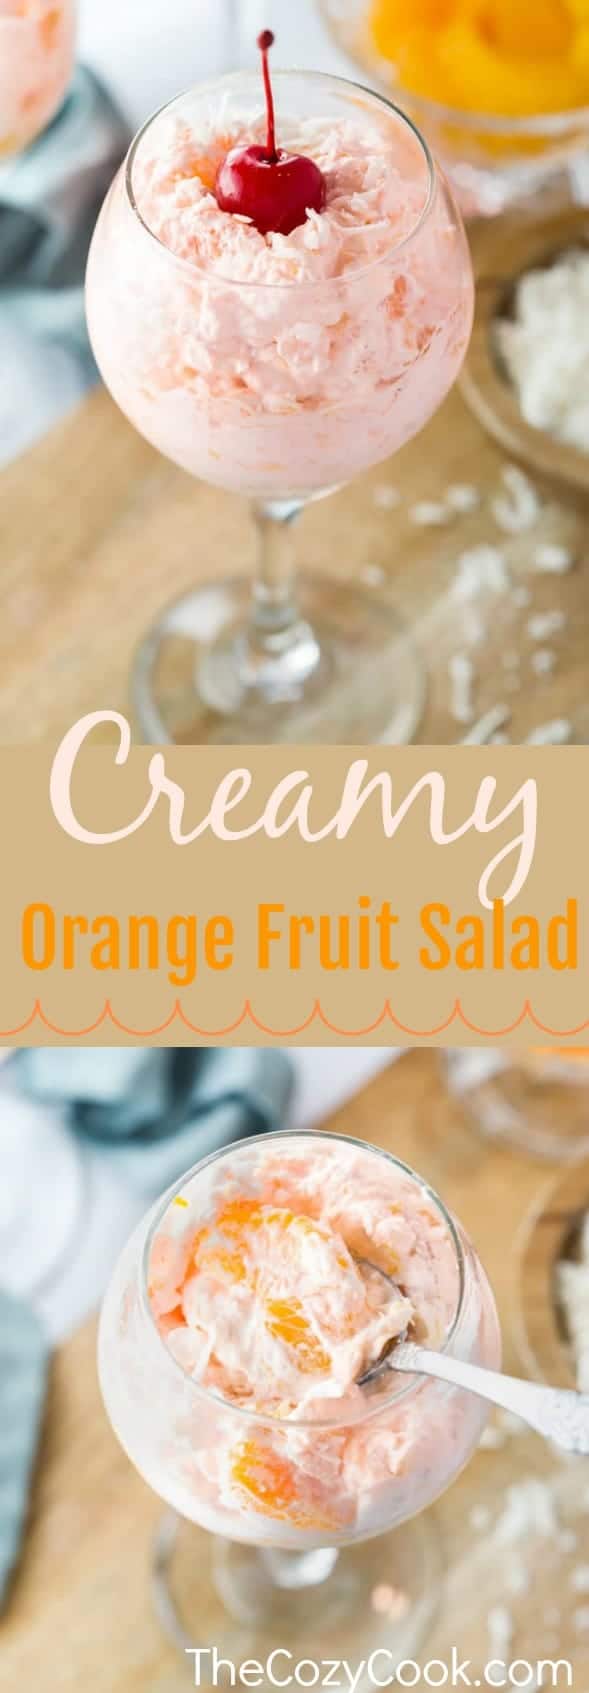 This creamy orange fruit salad is loaded with an easy combination of mandarin oranges, crushed pineapple, coconut flakes, and an orange-flavored cool whip mixture that's topped with maraschino cherries. #Fruit #Salad #Oranges #Creamy #Mandarin #Side Dishes #Summer Food #CoolWhip #Brunch #Dessert #Holidays